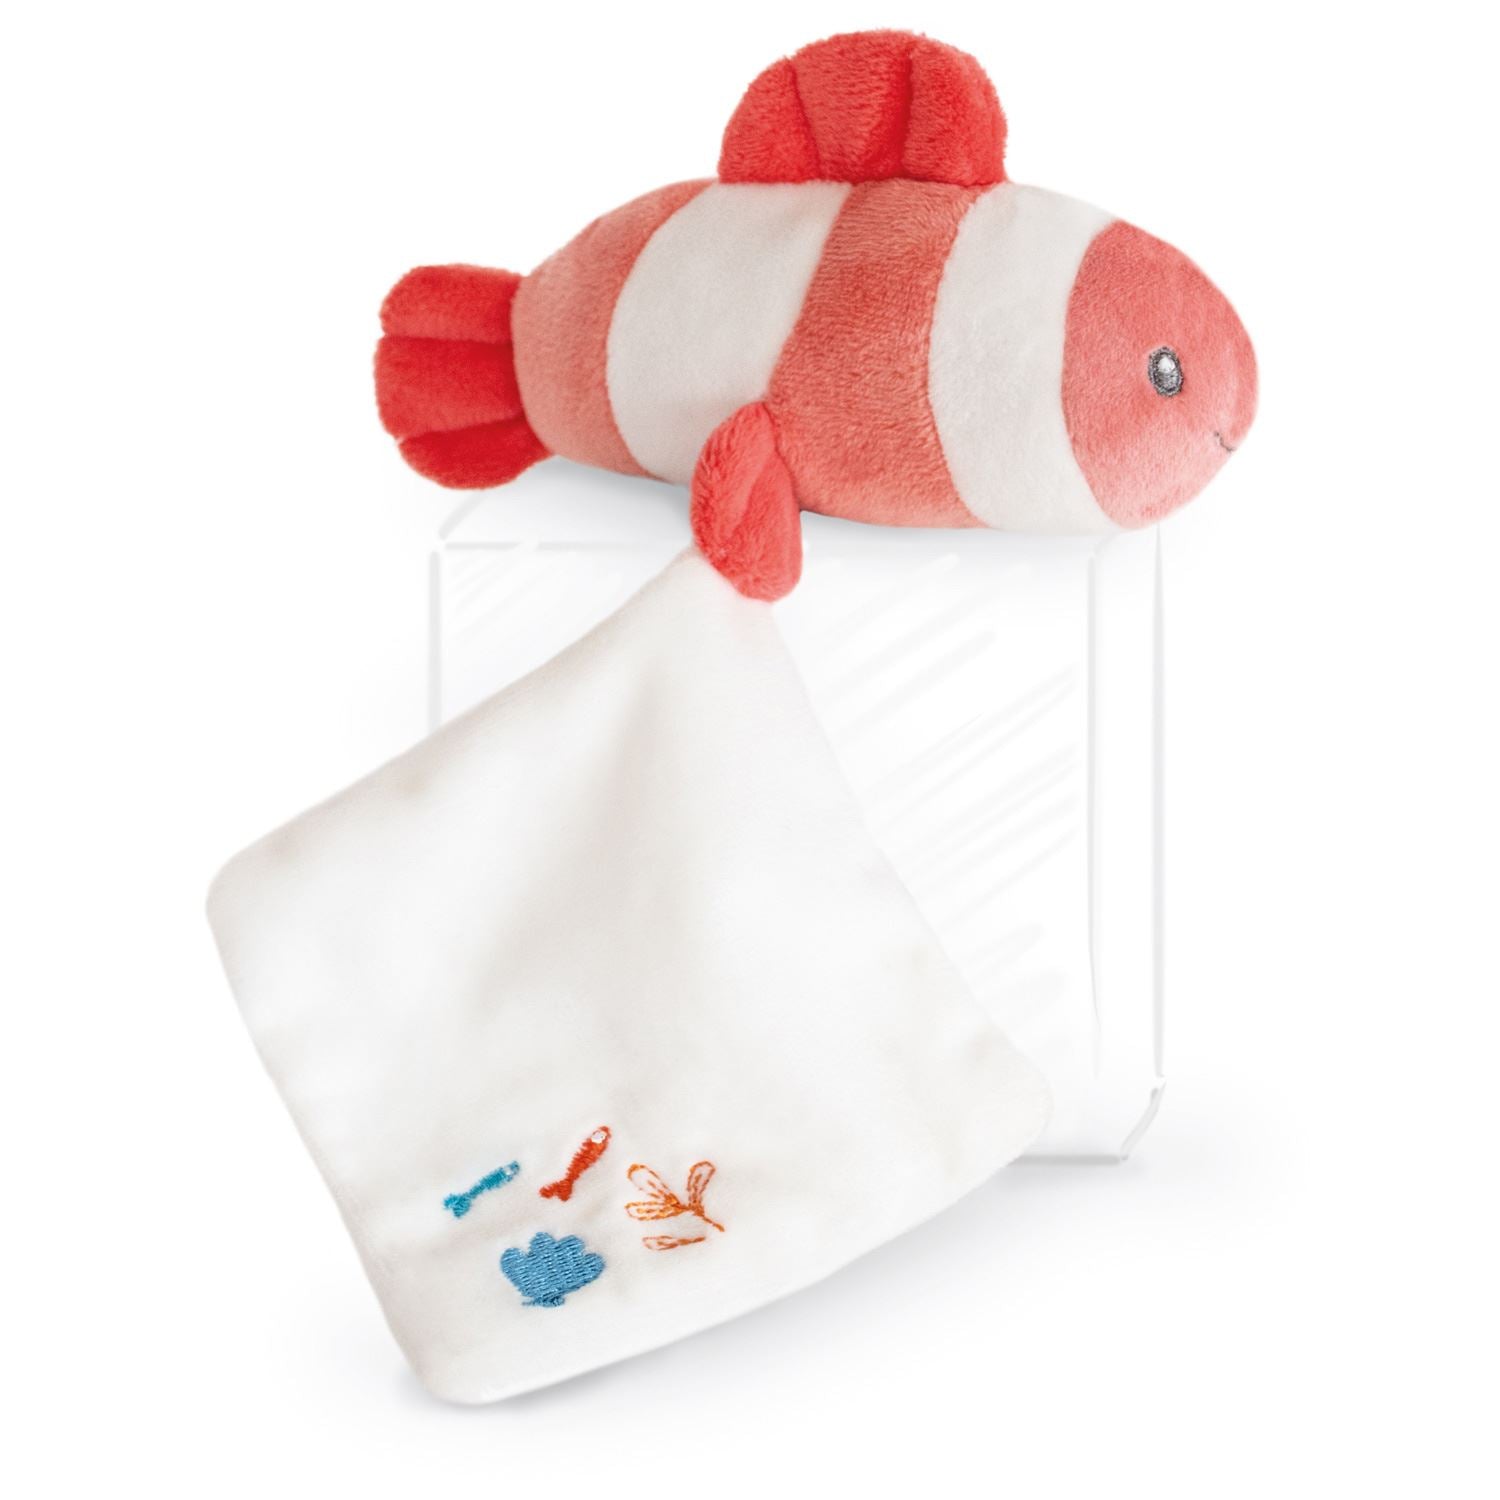 Under the Sea: Pink Turtle Plush with Doudou blanket